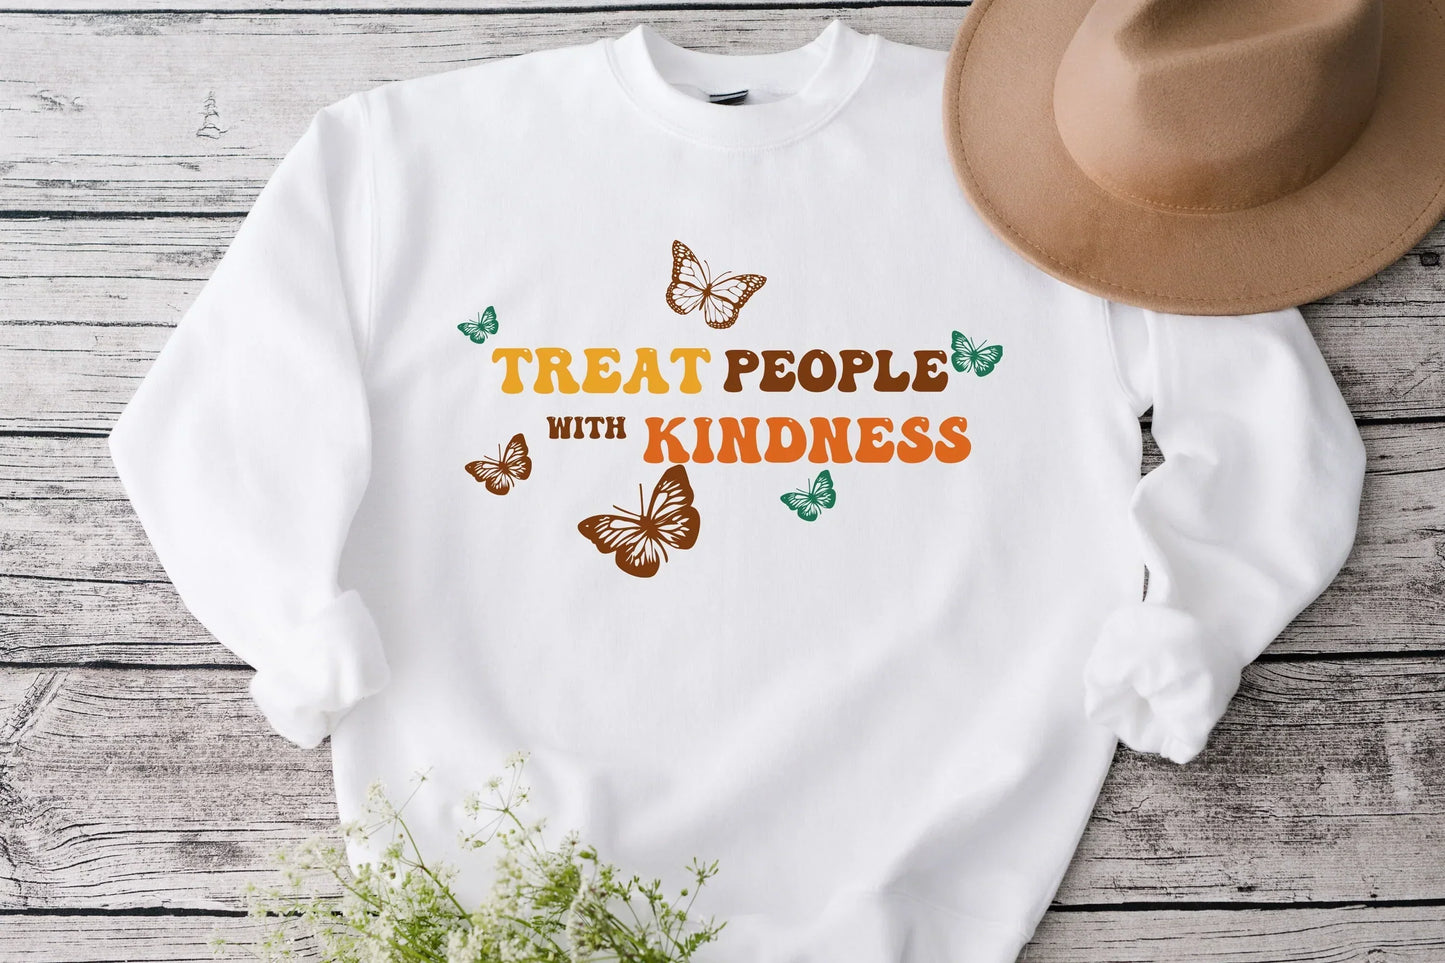 Treat People With Kindness, Retro Harry, Harry Styles Shirt, Fine Line Shirt, Kindness Sweatshirt for Women, One Direction Hoodie, Empathy